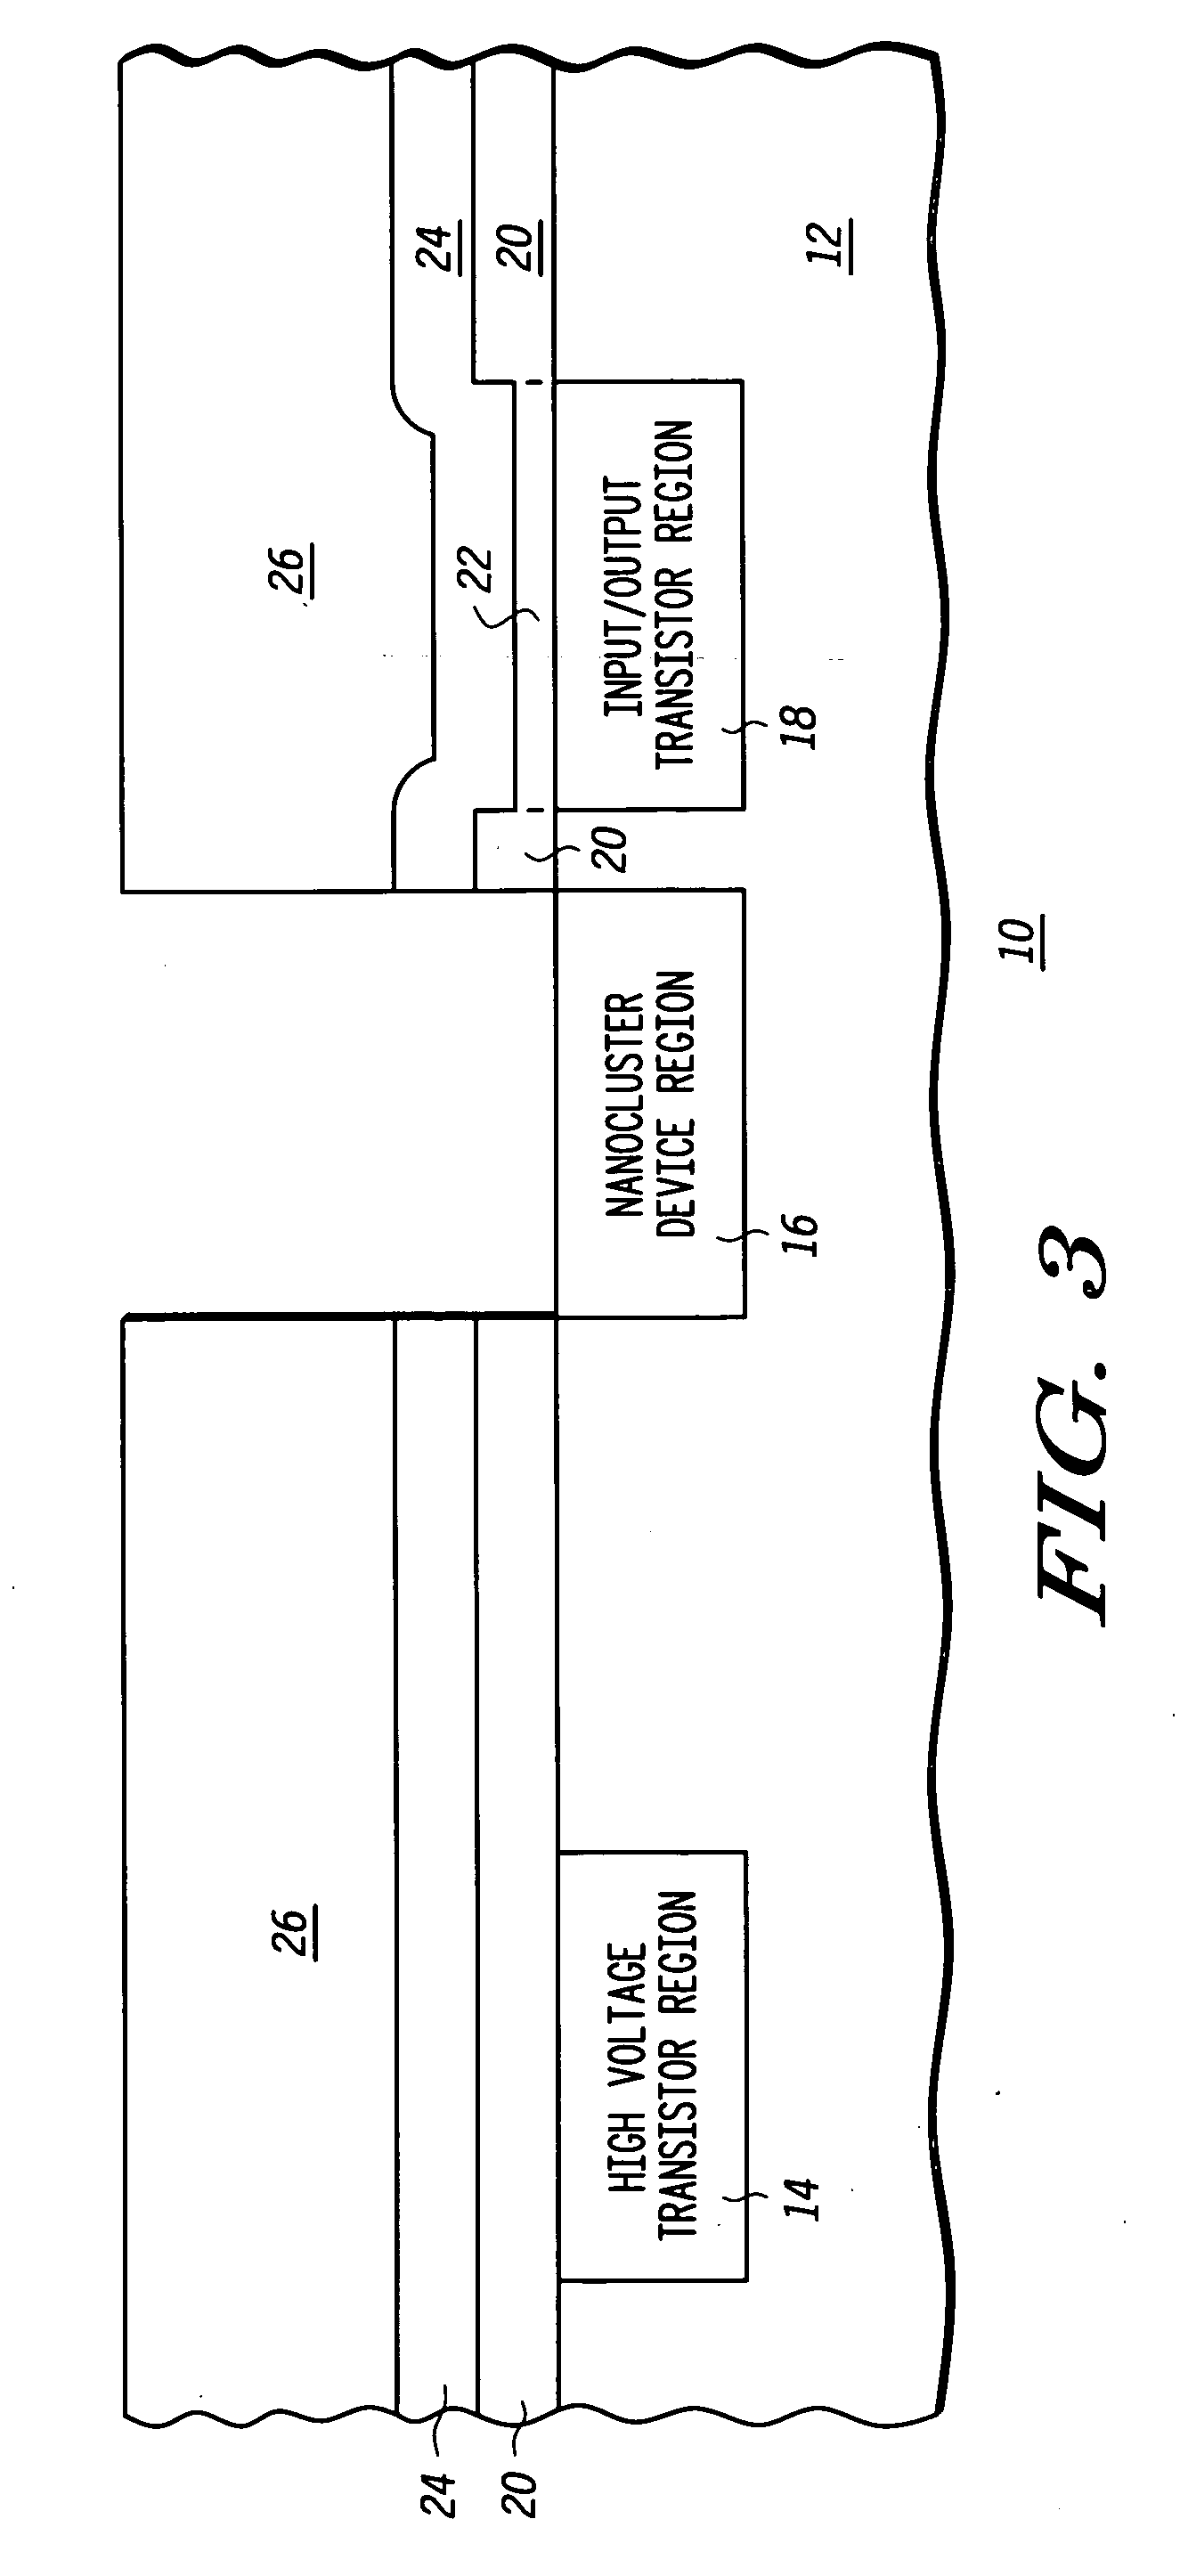 Method of forming an integrated circuit having nanocluster devices and non-nanocluster devices